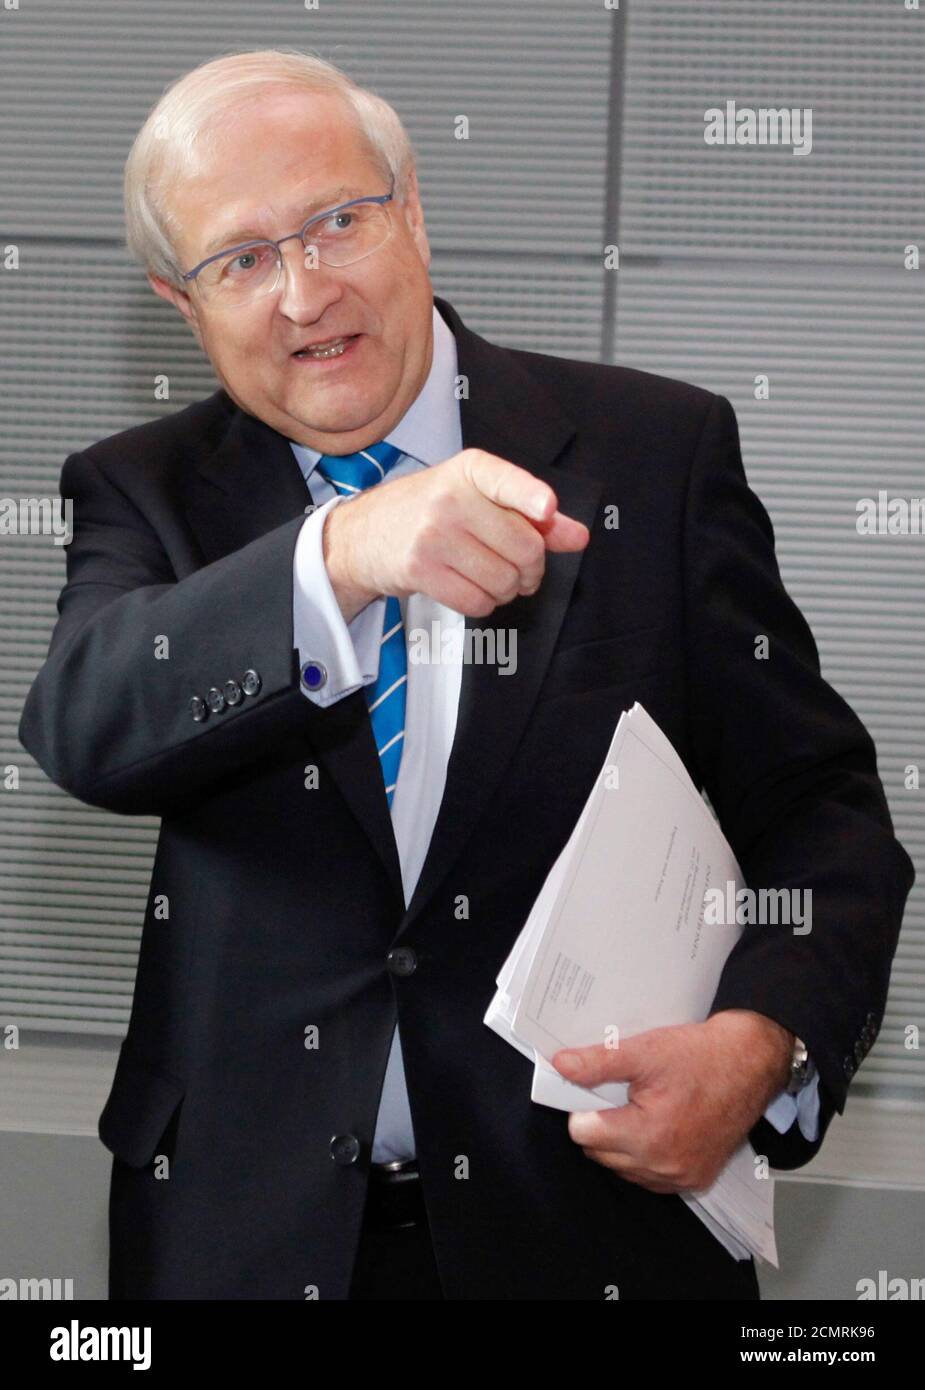 Rainer Bruederle, vice chairman of the pro-business Free Democratic Party (FDP) attends a meeting of the FDP parliamentary group in Berlin September 28, 2009.  REUTERS/Thomas Peter  (GERMANY POLITICS HEADSHOT) Stock Photo